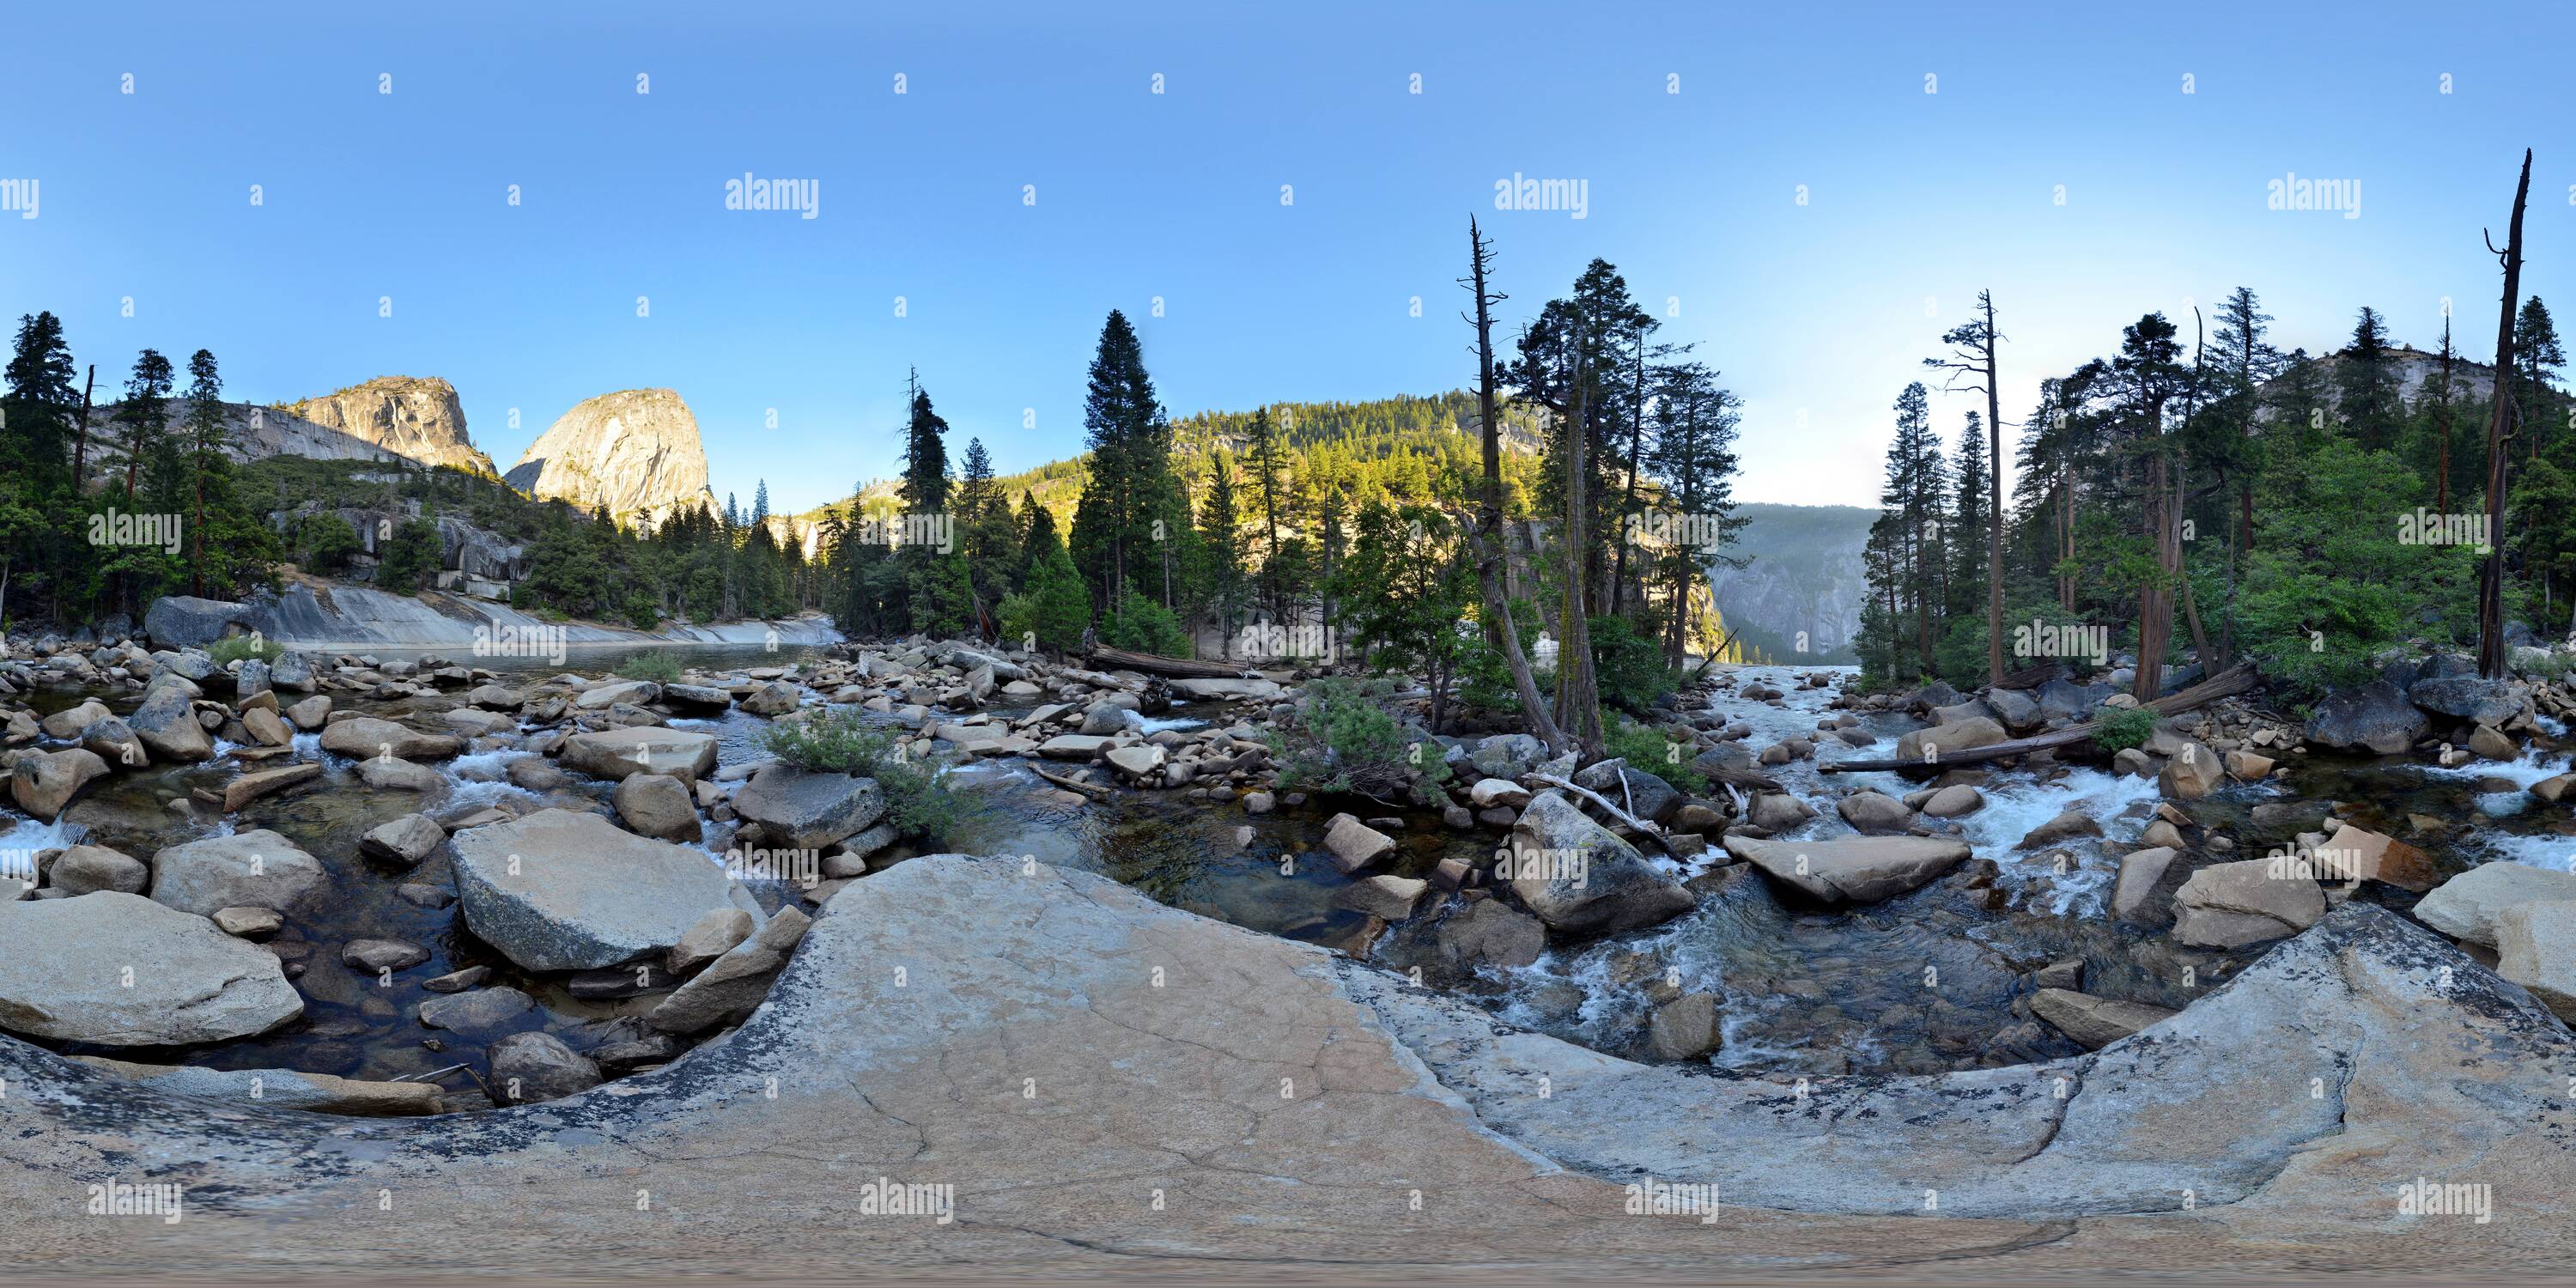 360 degree panoramic view of Top of Vernal Falls, on a rock in Emerald Pool